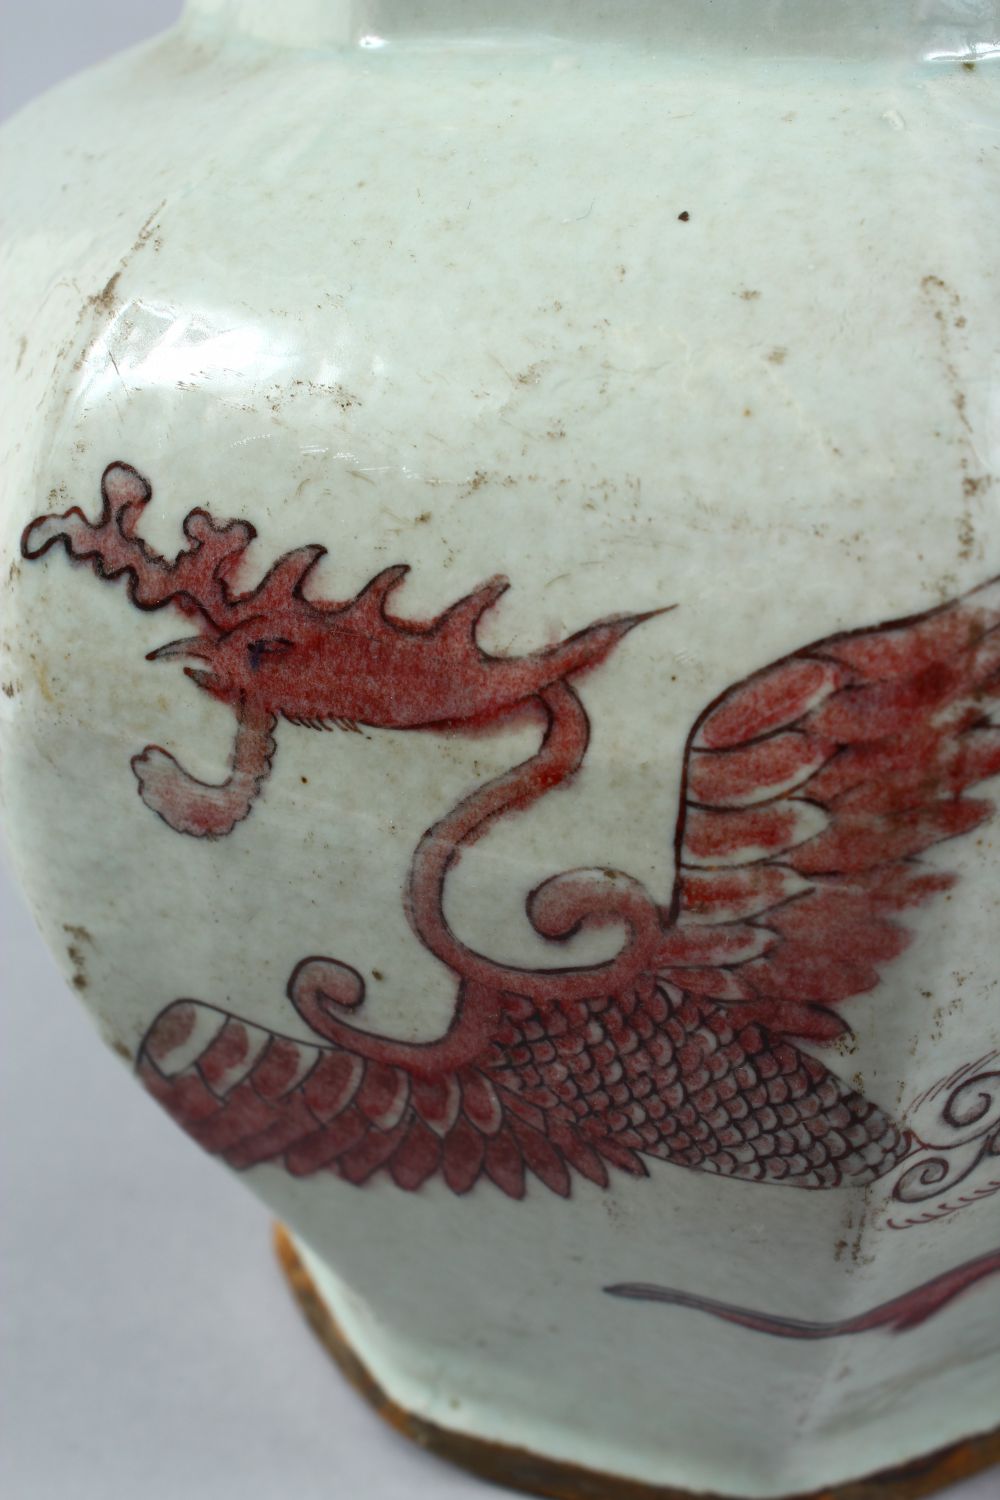 A CHINESE IRON RED DECORATED OCTAGONAL PORCELAIN JAR, the body of the jar decorated in iron red to - Image 5 of 8